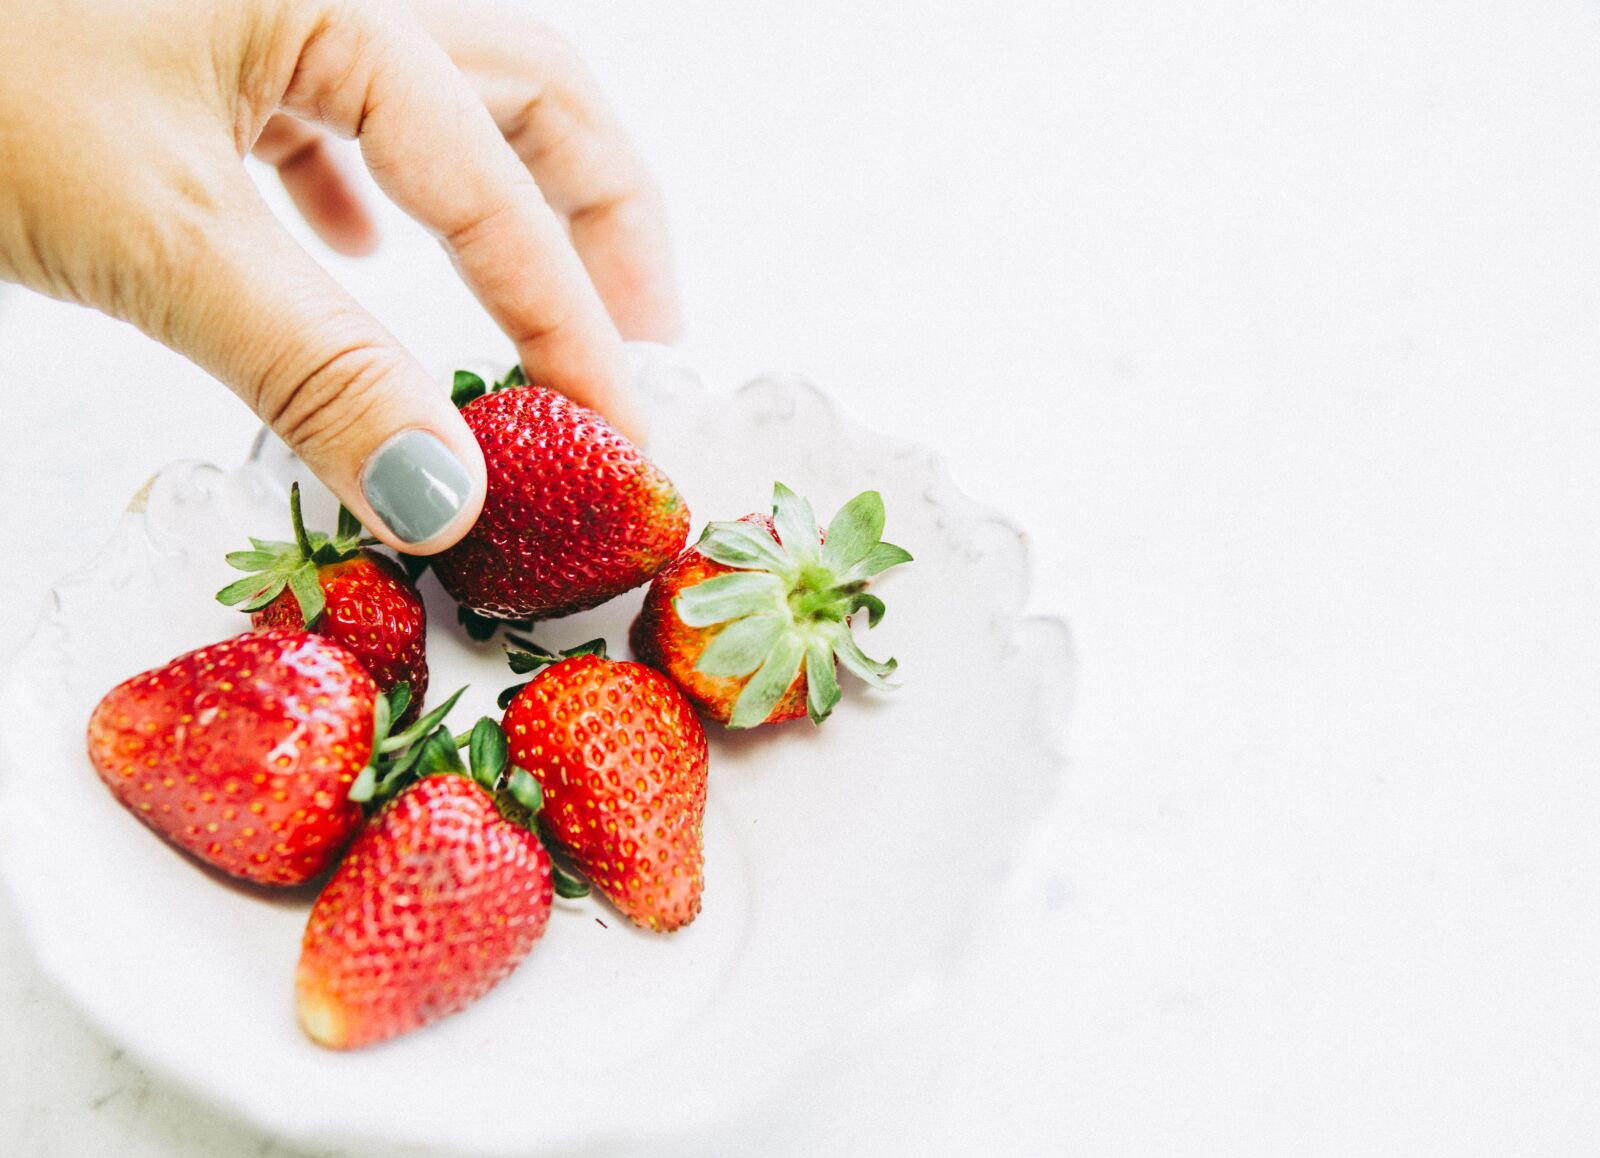 Sony a6000 sample photo. Strawberry, hand, healthy photography